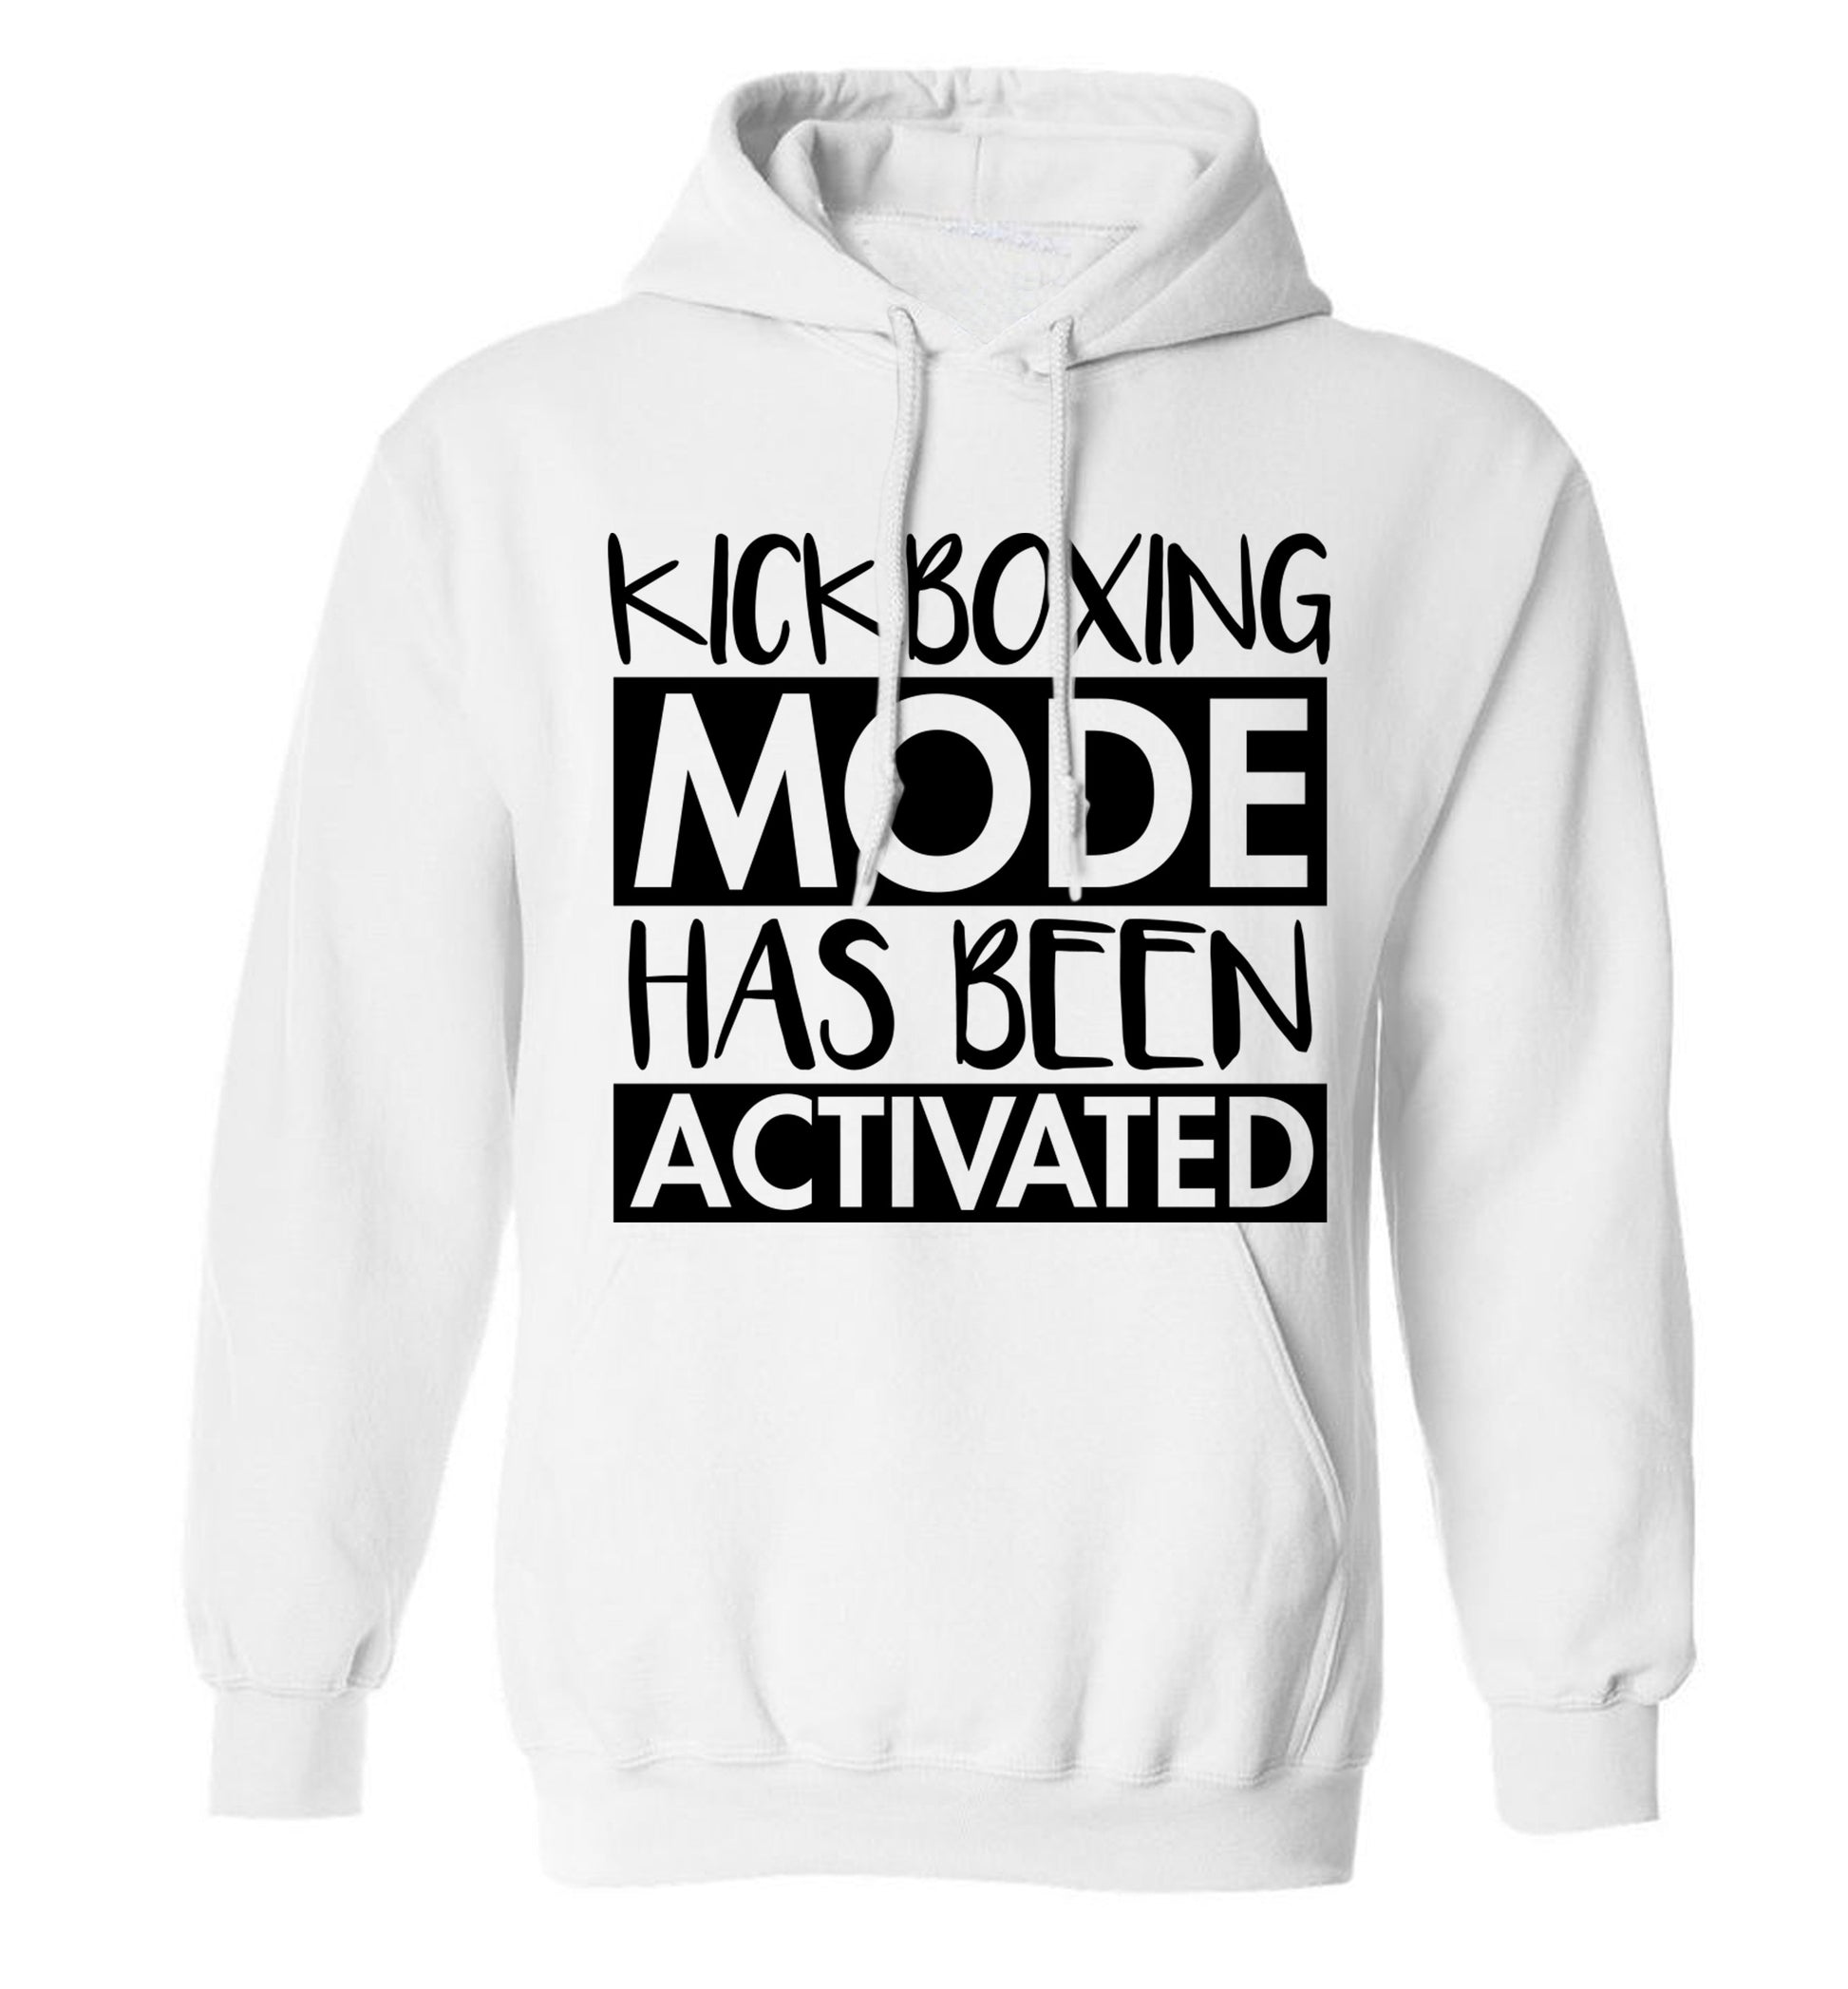 Kickboxing mode activated adults unisex white hoodie 2XL